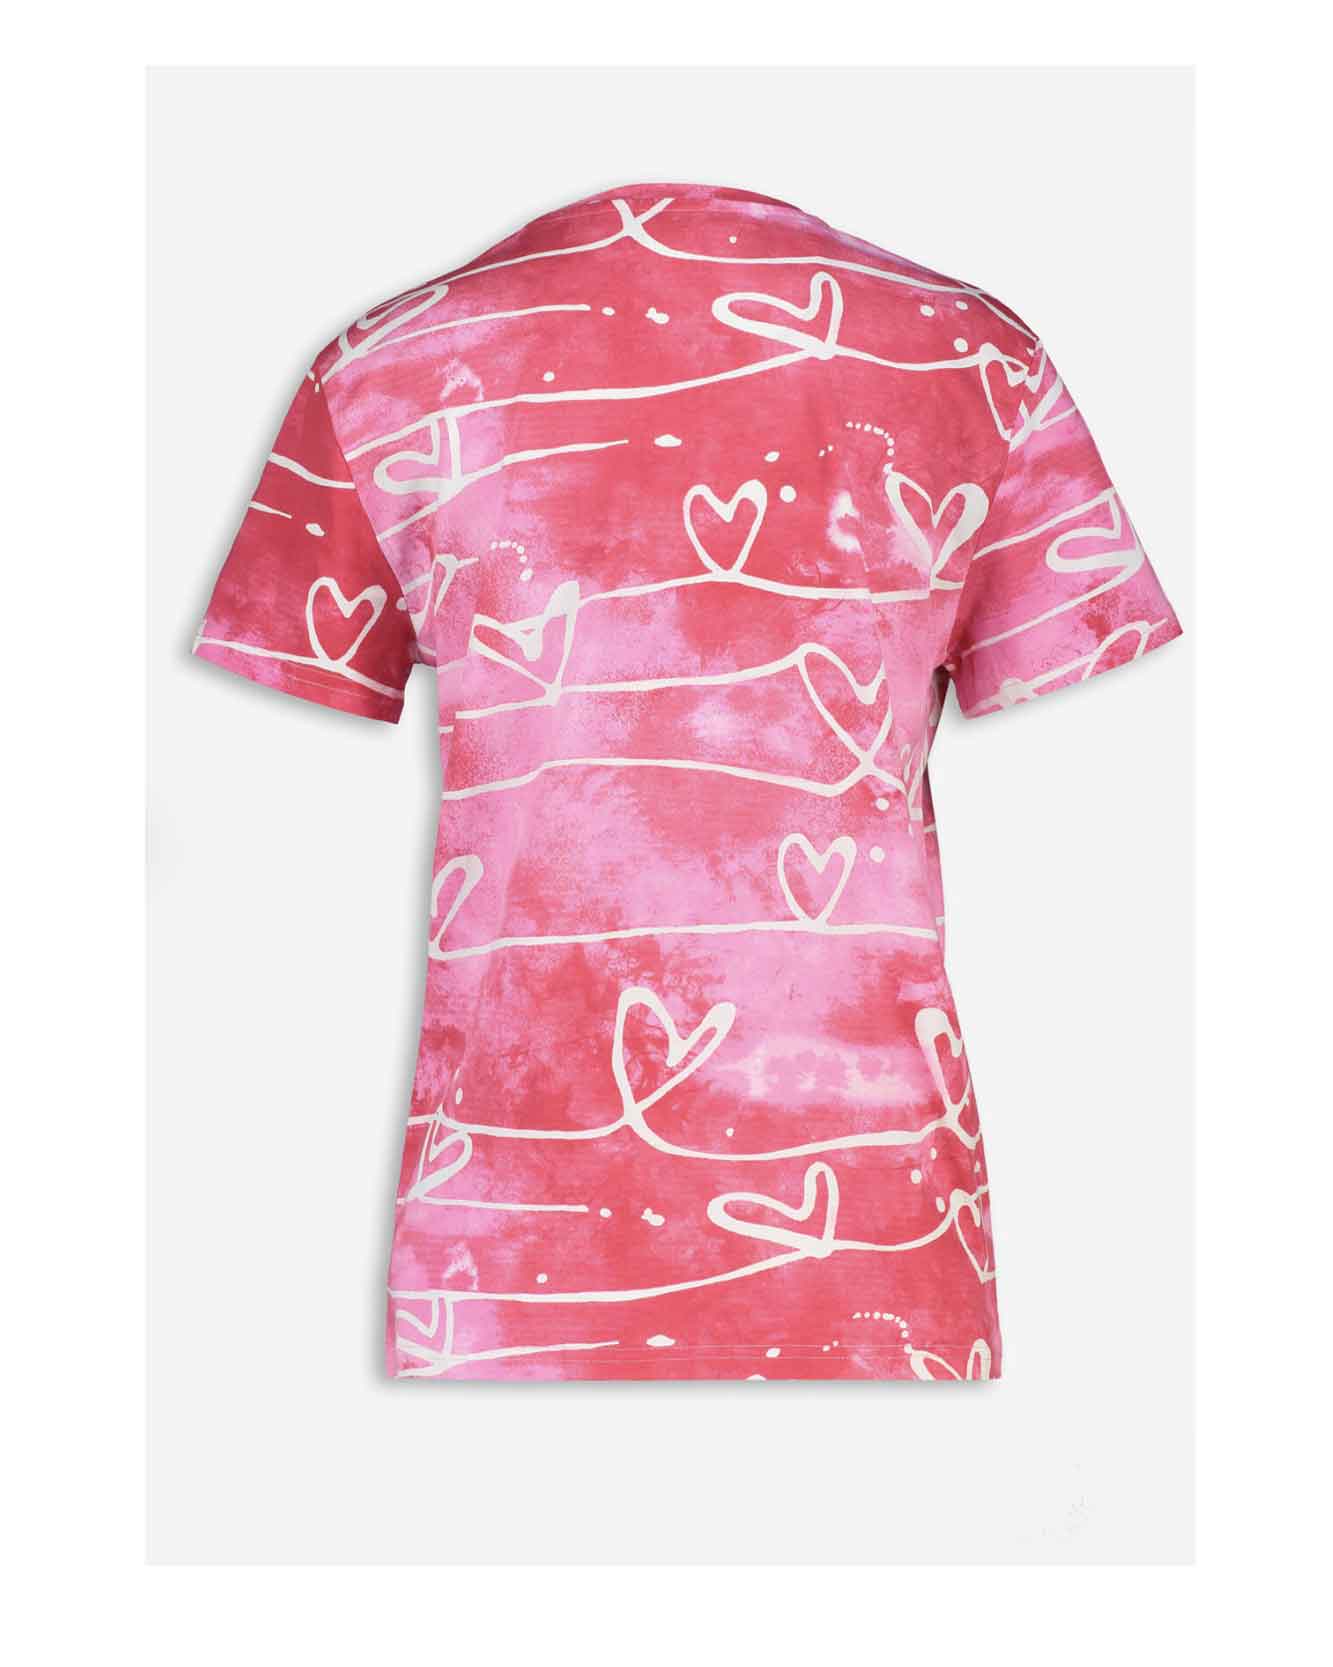 Illustrated t-shirt as part of a range of merchandise for CHOOSE LOVE charity in collaboration with TK Maxx and Print Club London. Repeat pattern of linear love hearts with a watercolour gradient ink background. Pink ink background.